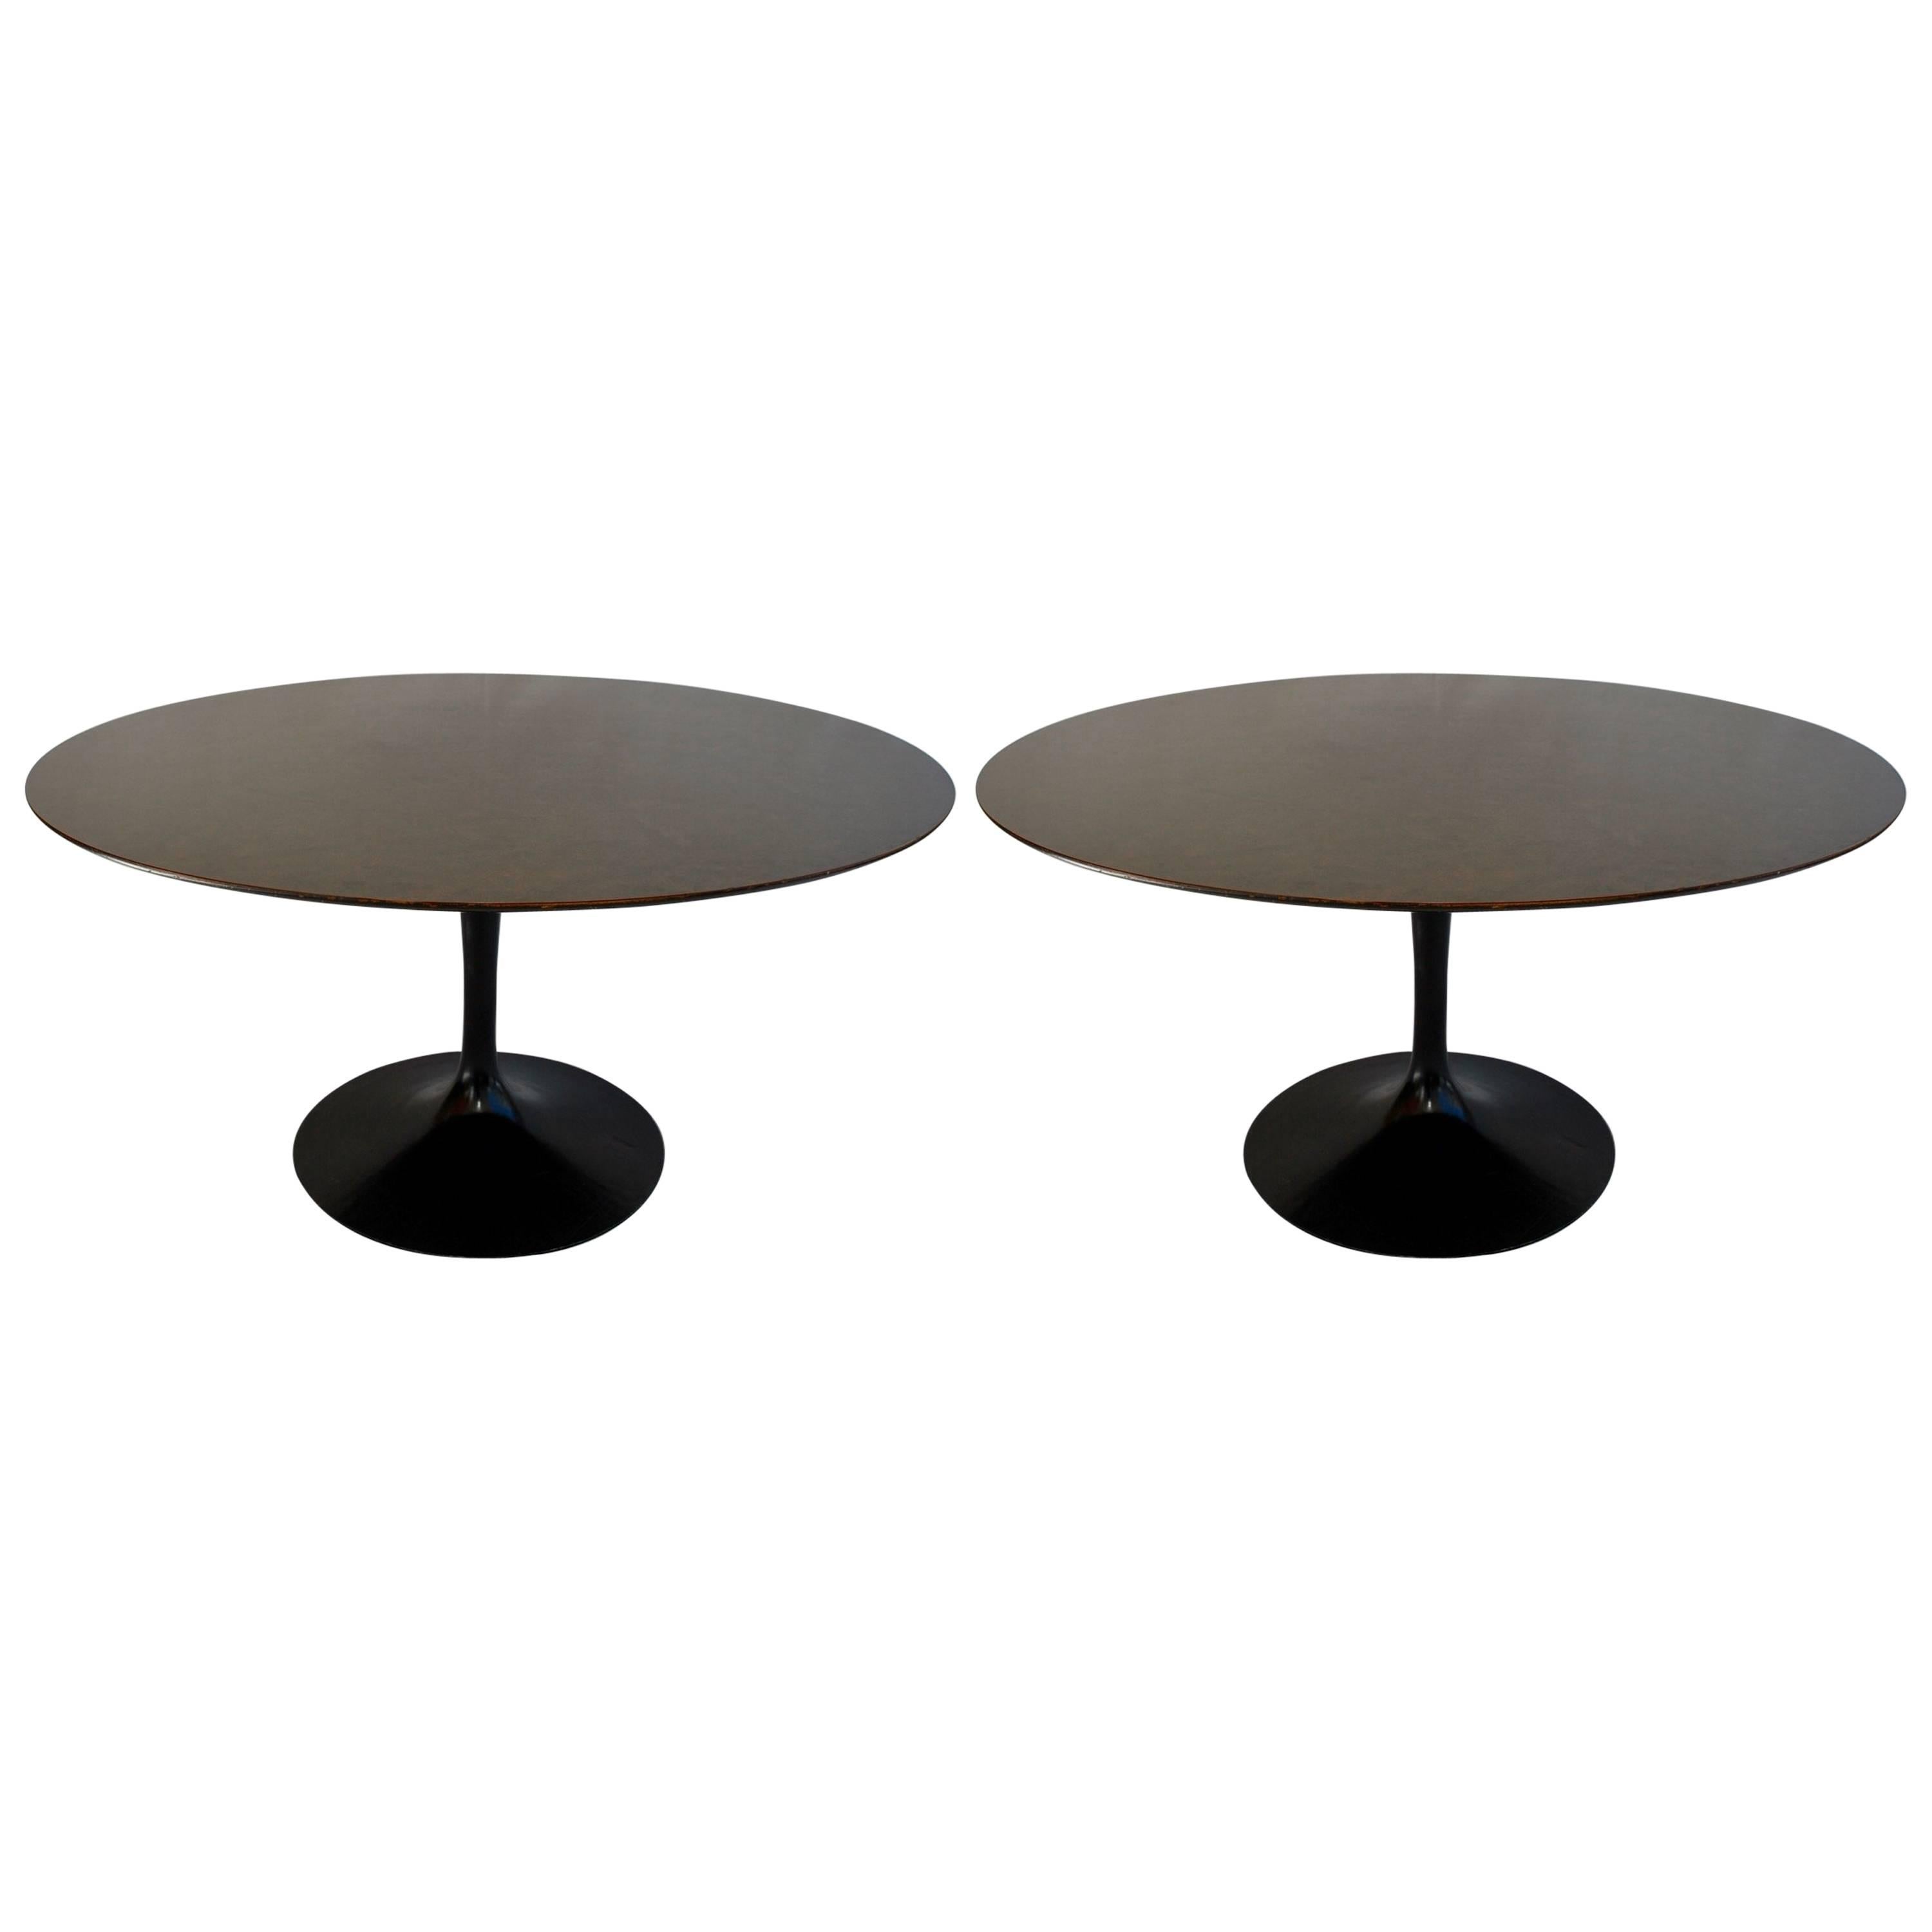 Pair of Large Saarinen Dinning Room Table ( price for one )